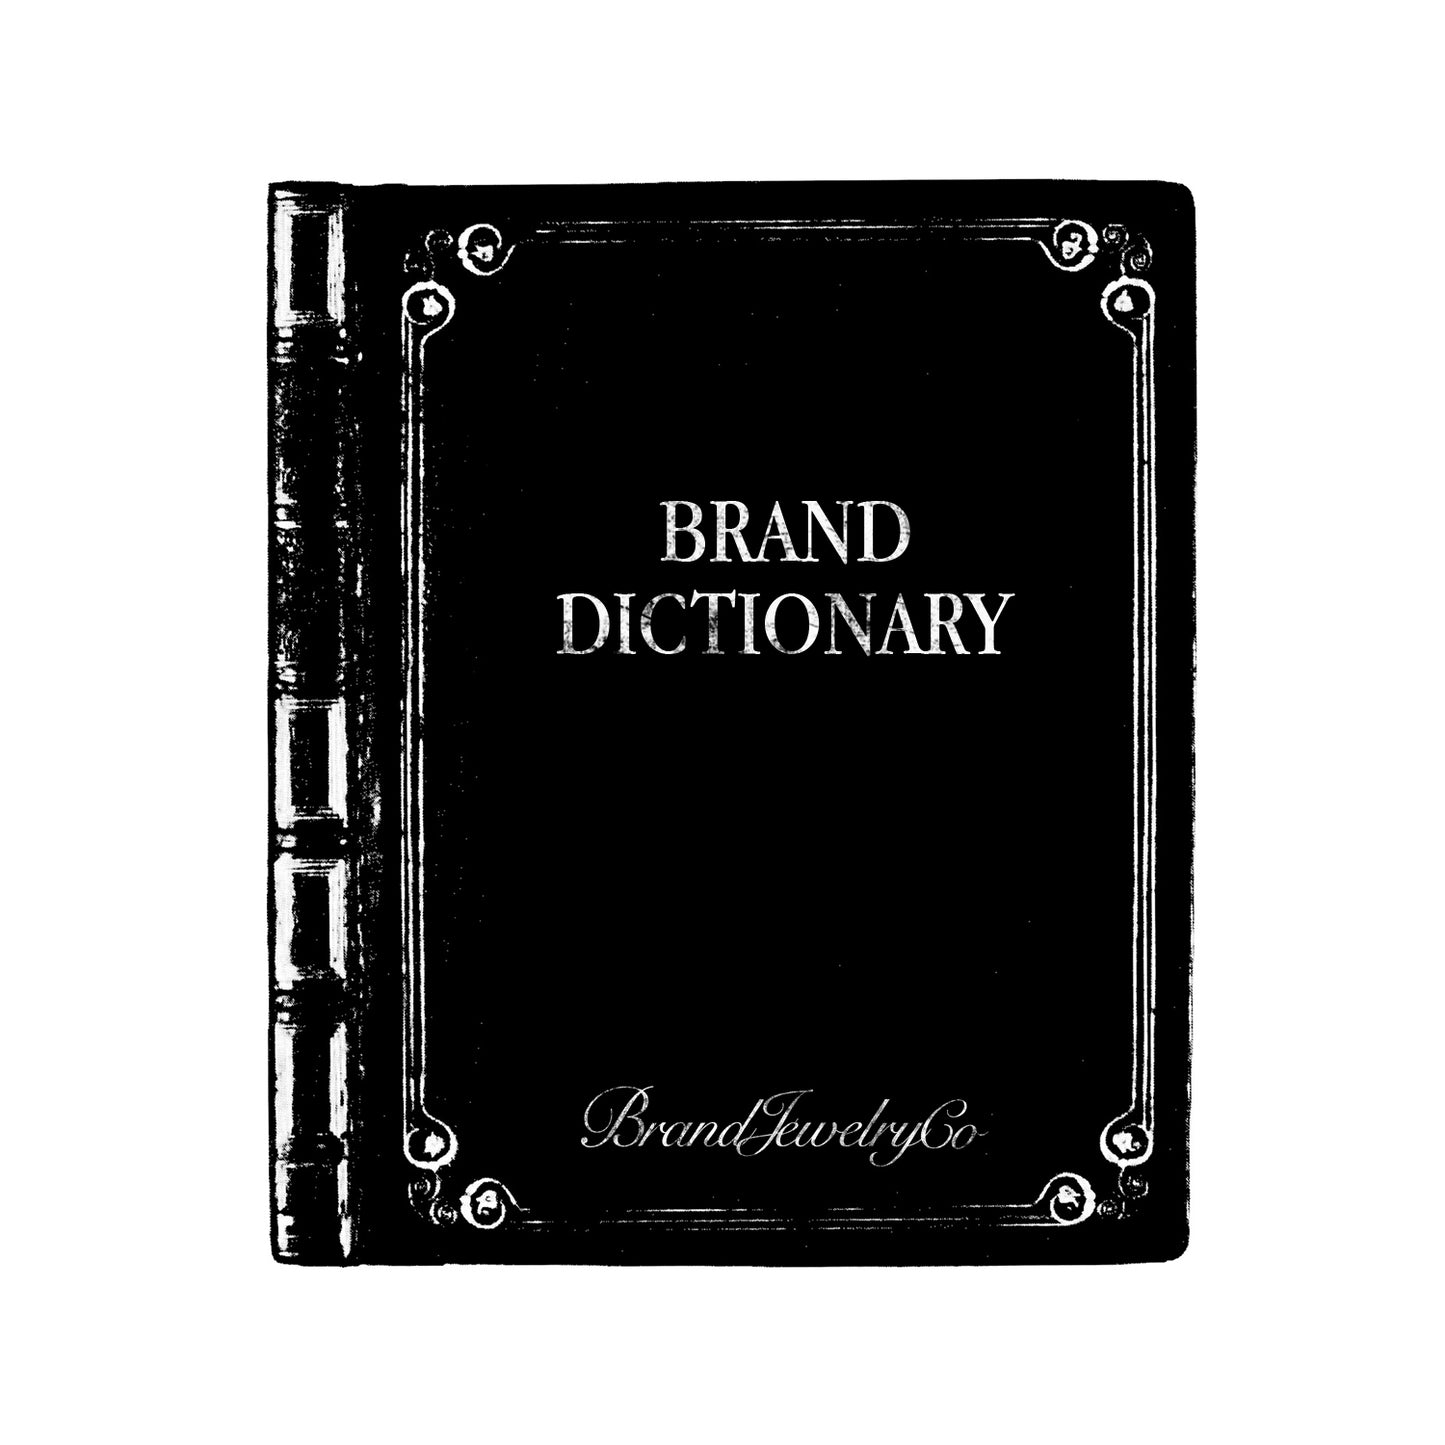 The Brand Dictionary